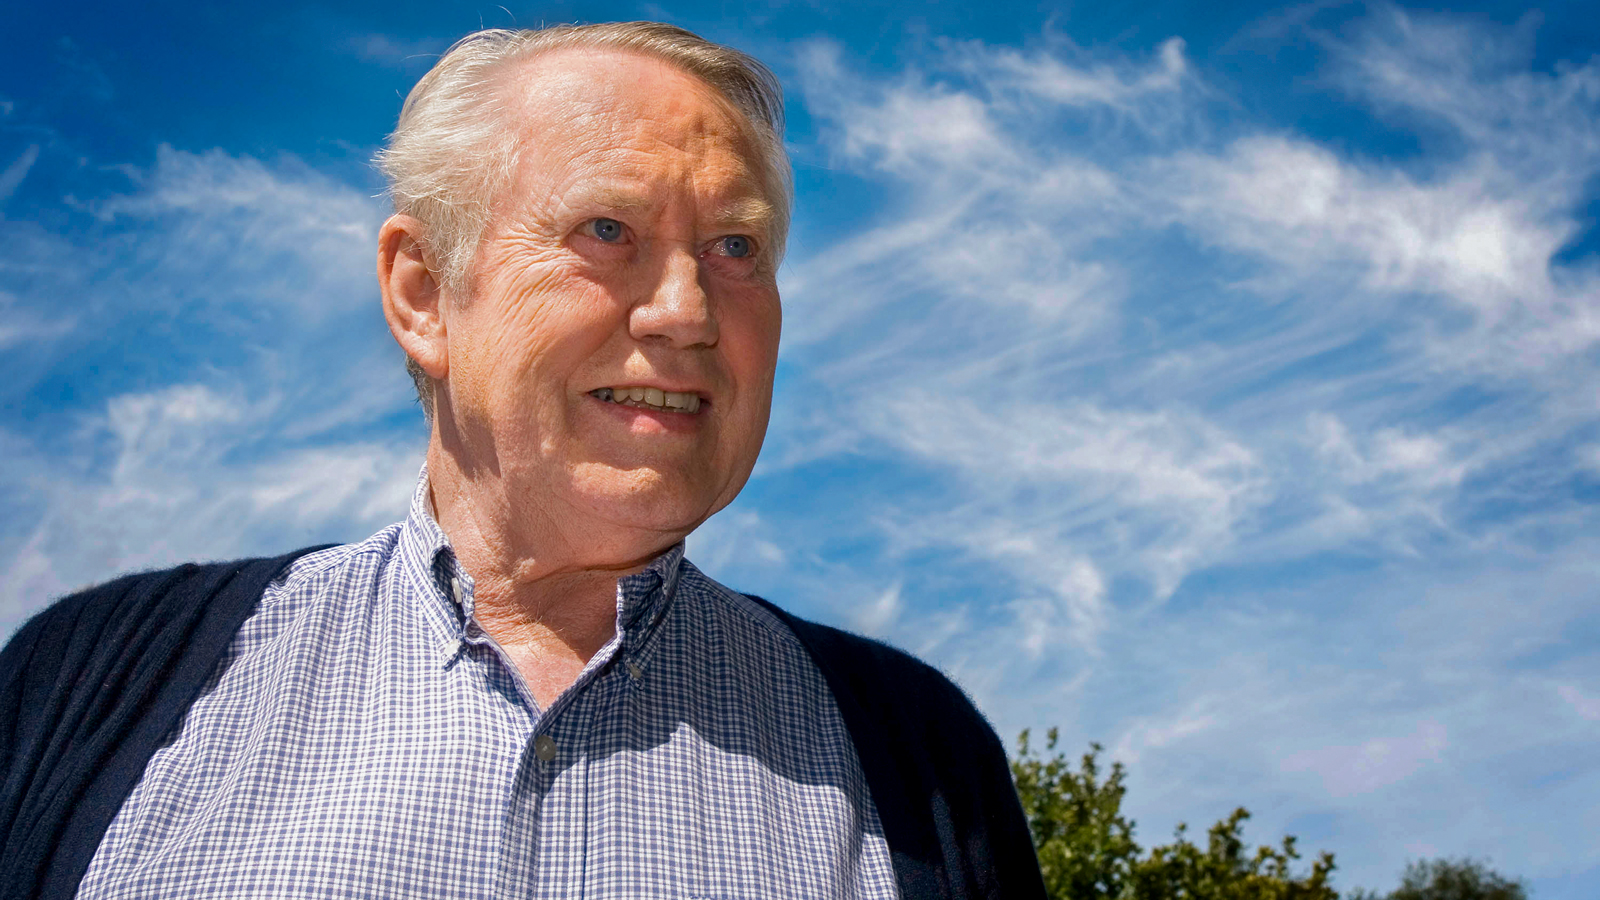 Chuck Feeney pictured against a blue sky